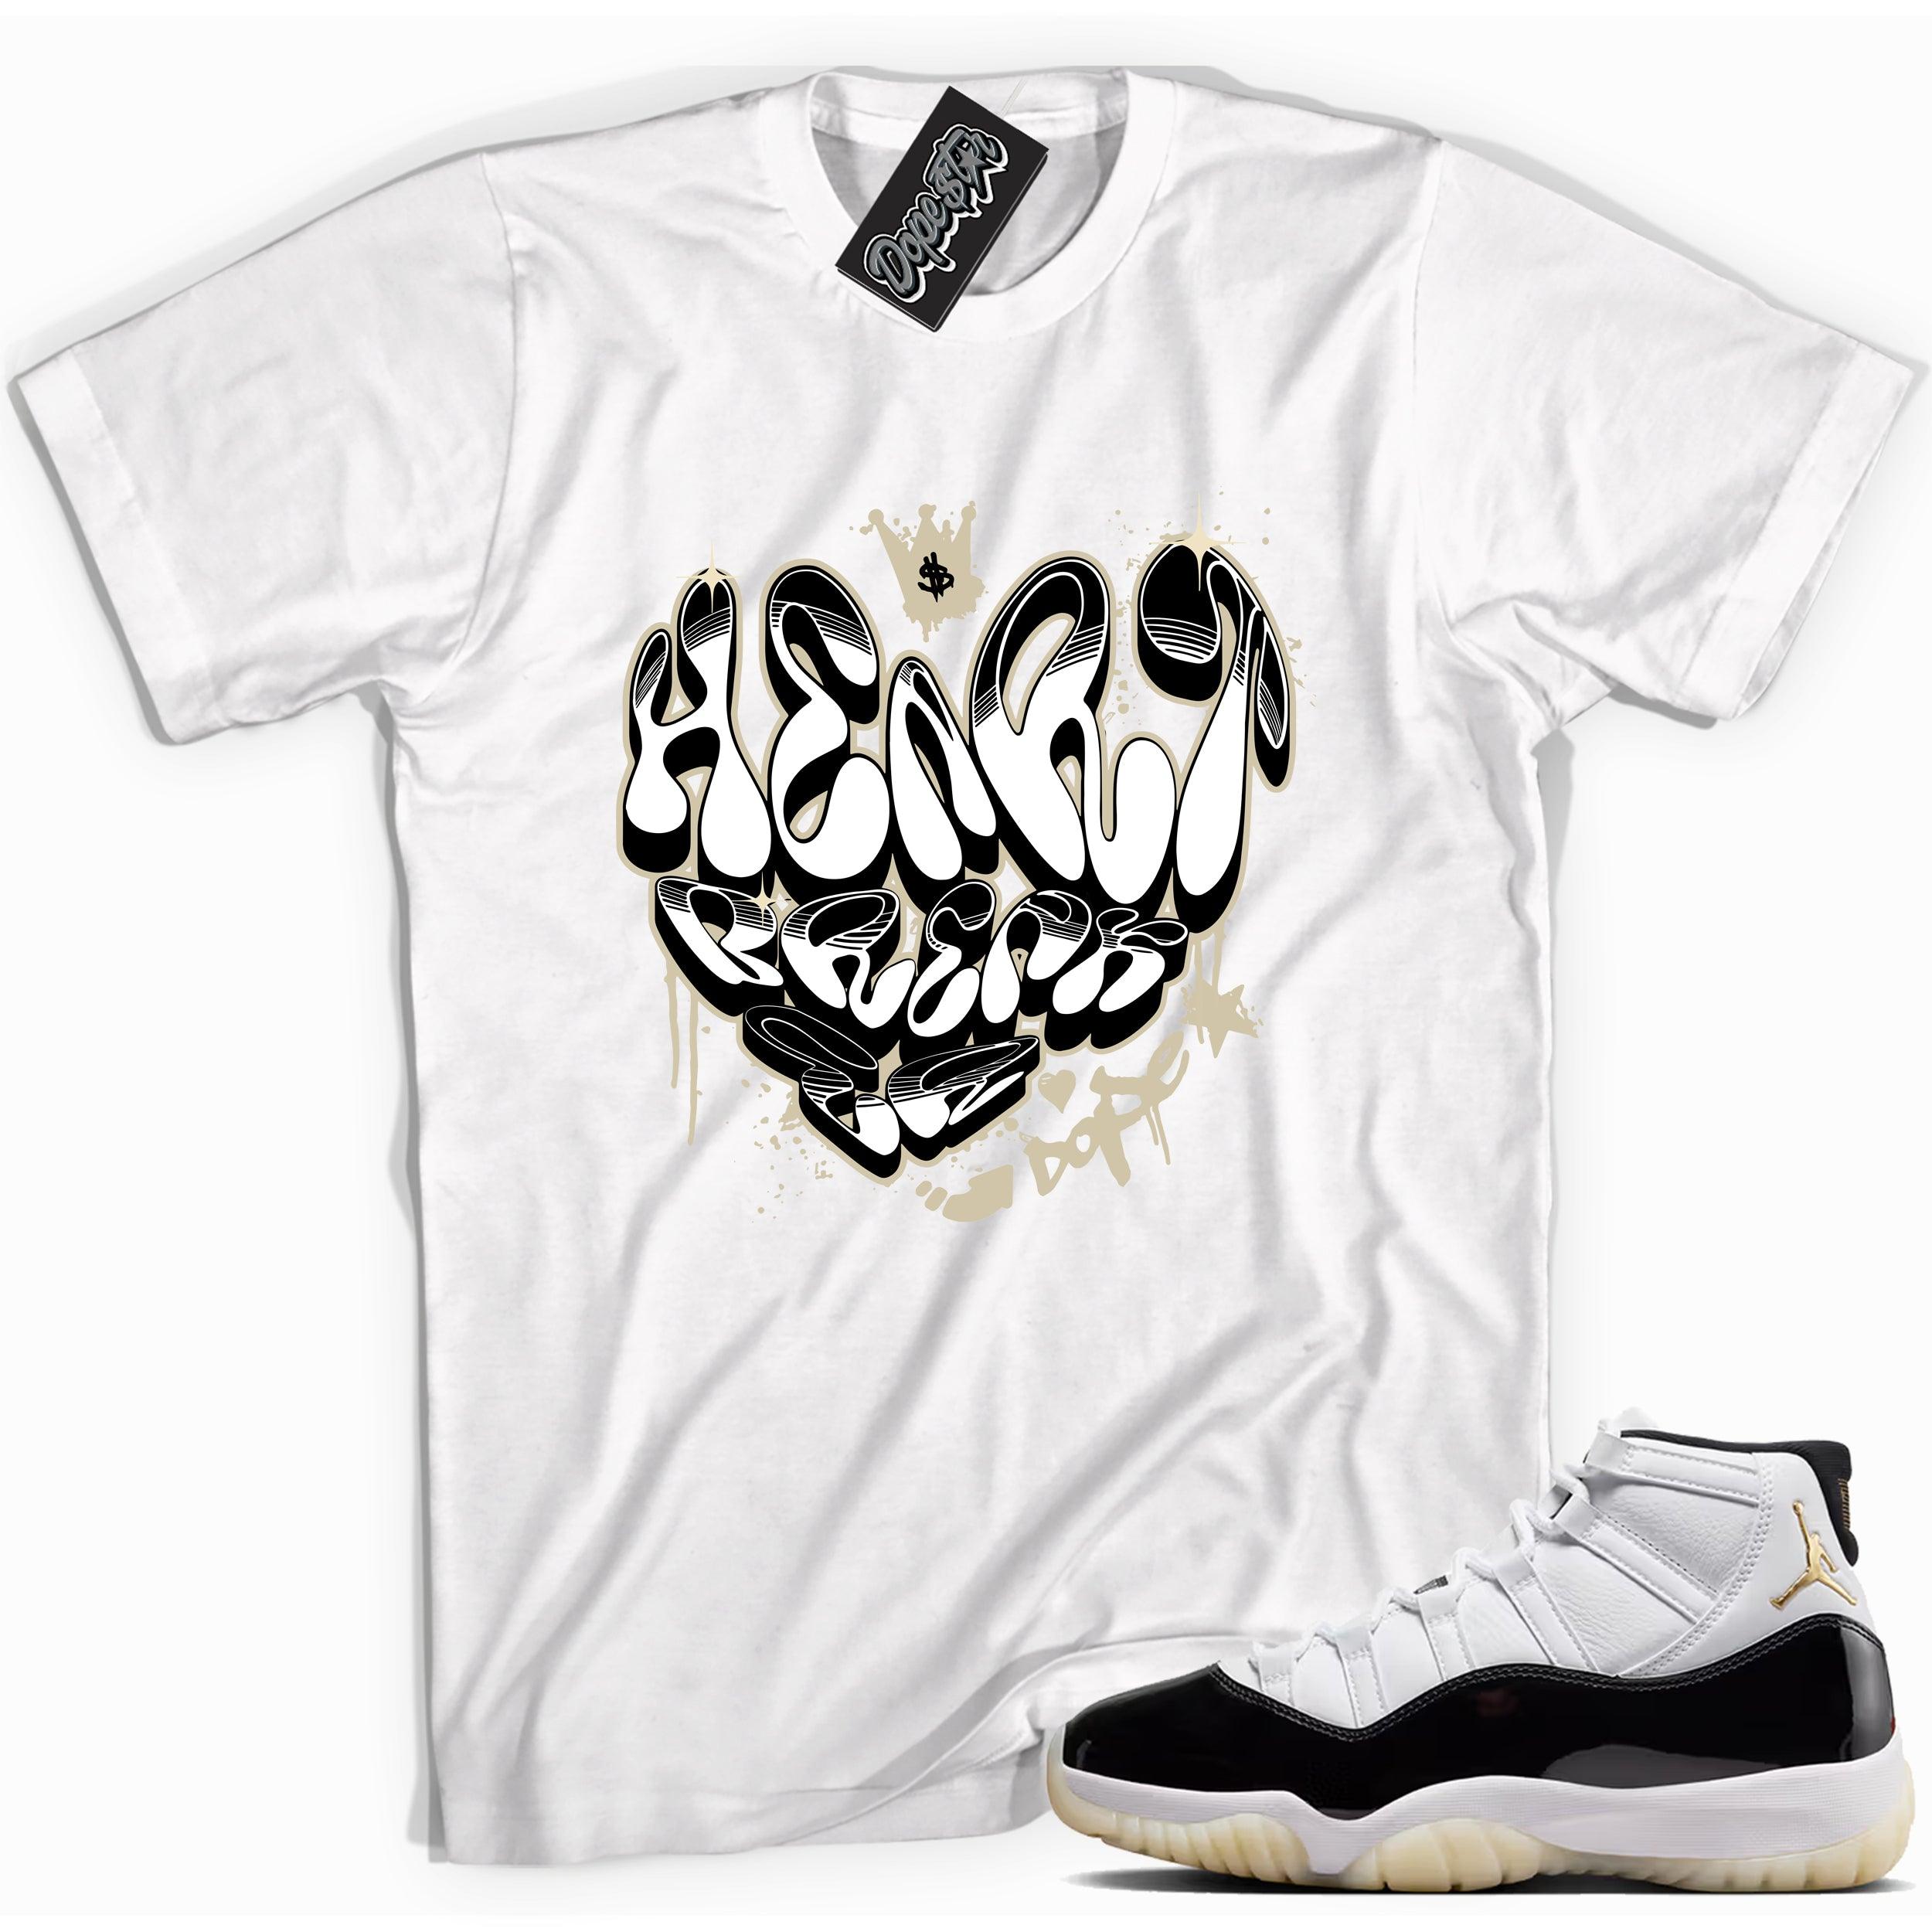 Cool White graphic tee with “ Heartbreaker Graffiti ” print, that perfectly matches AIR JORDAN 11 RETRO GRATITUDE   sneakers